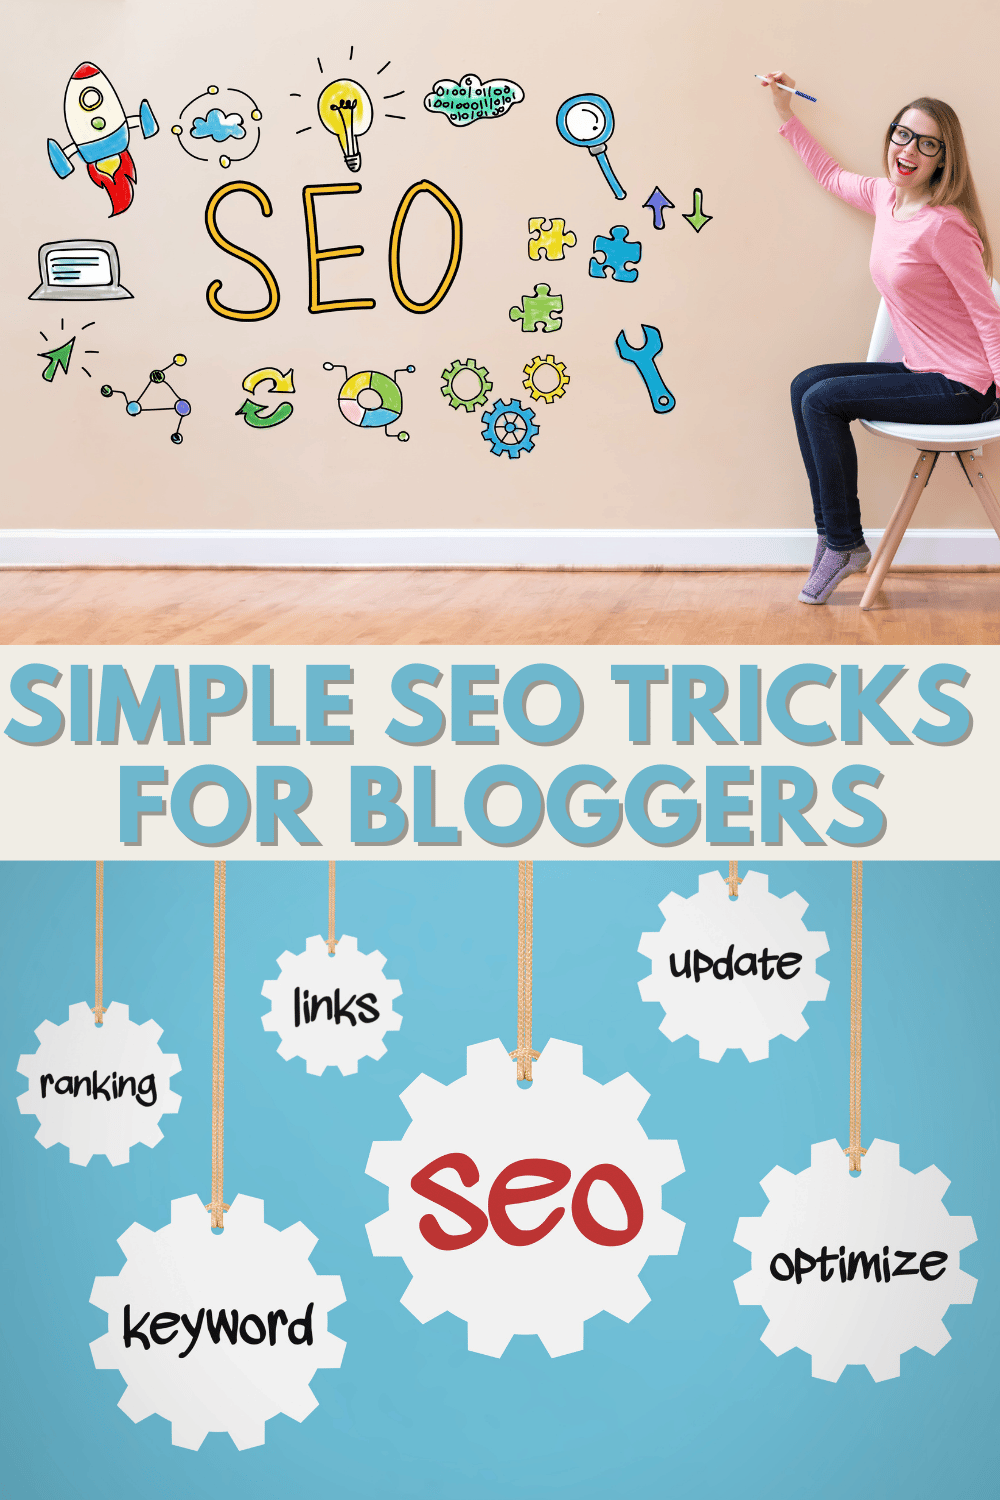 You don't have to study SEO full time to master the basics. Check out these SEO tricks for bloggers to get more search engine traffic with ease. #seo #bloggertips #bloggingtips #seotricks via @wondermomwannab